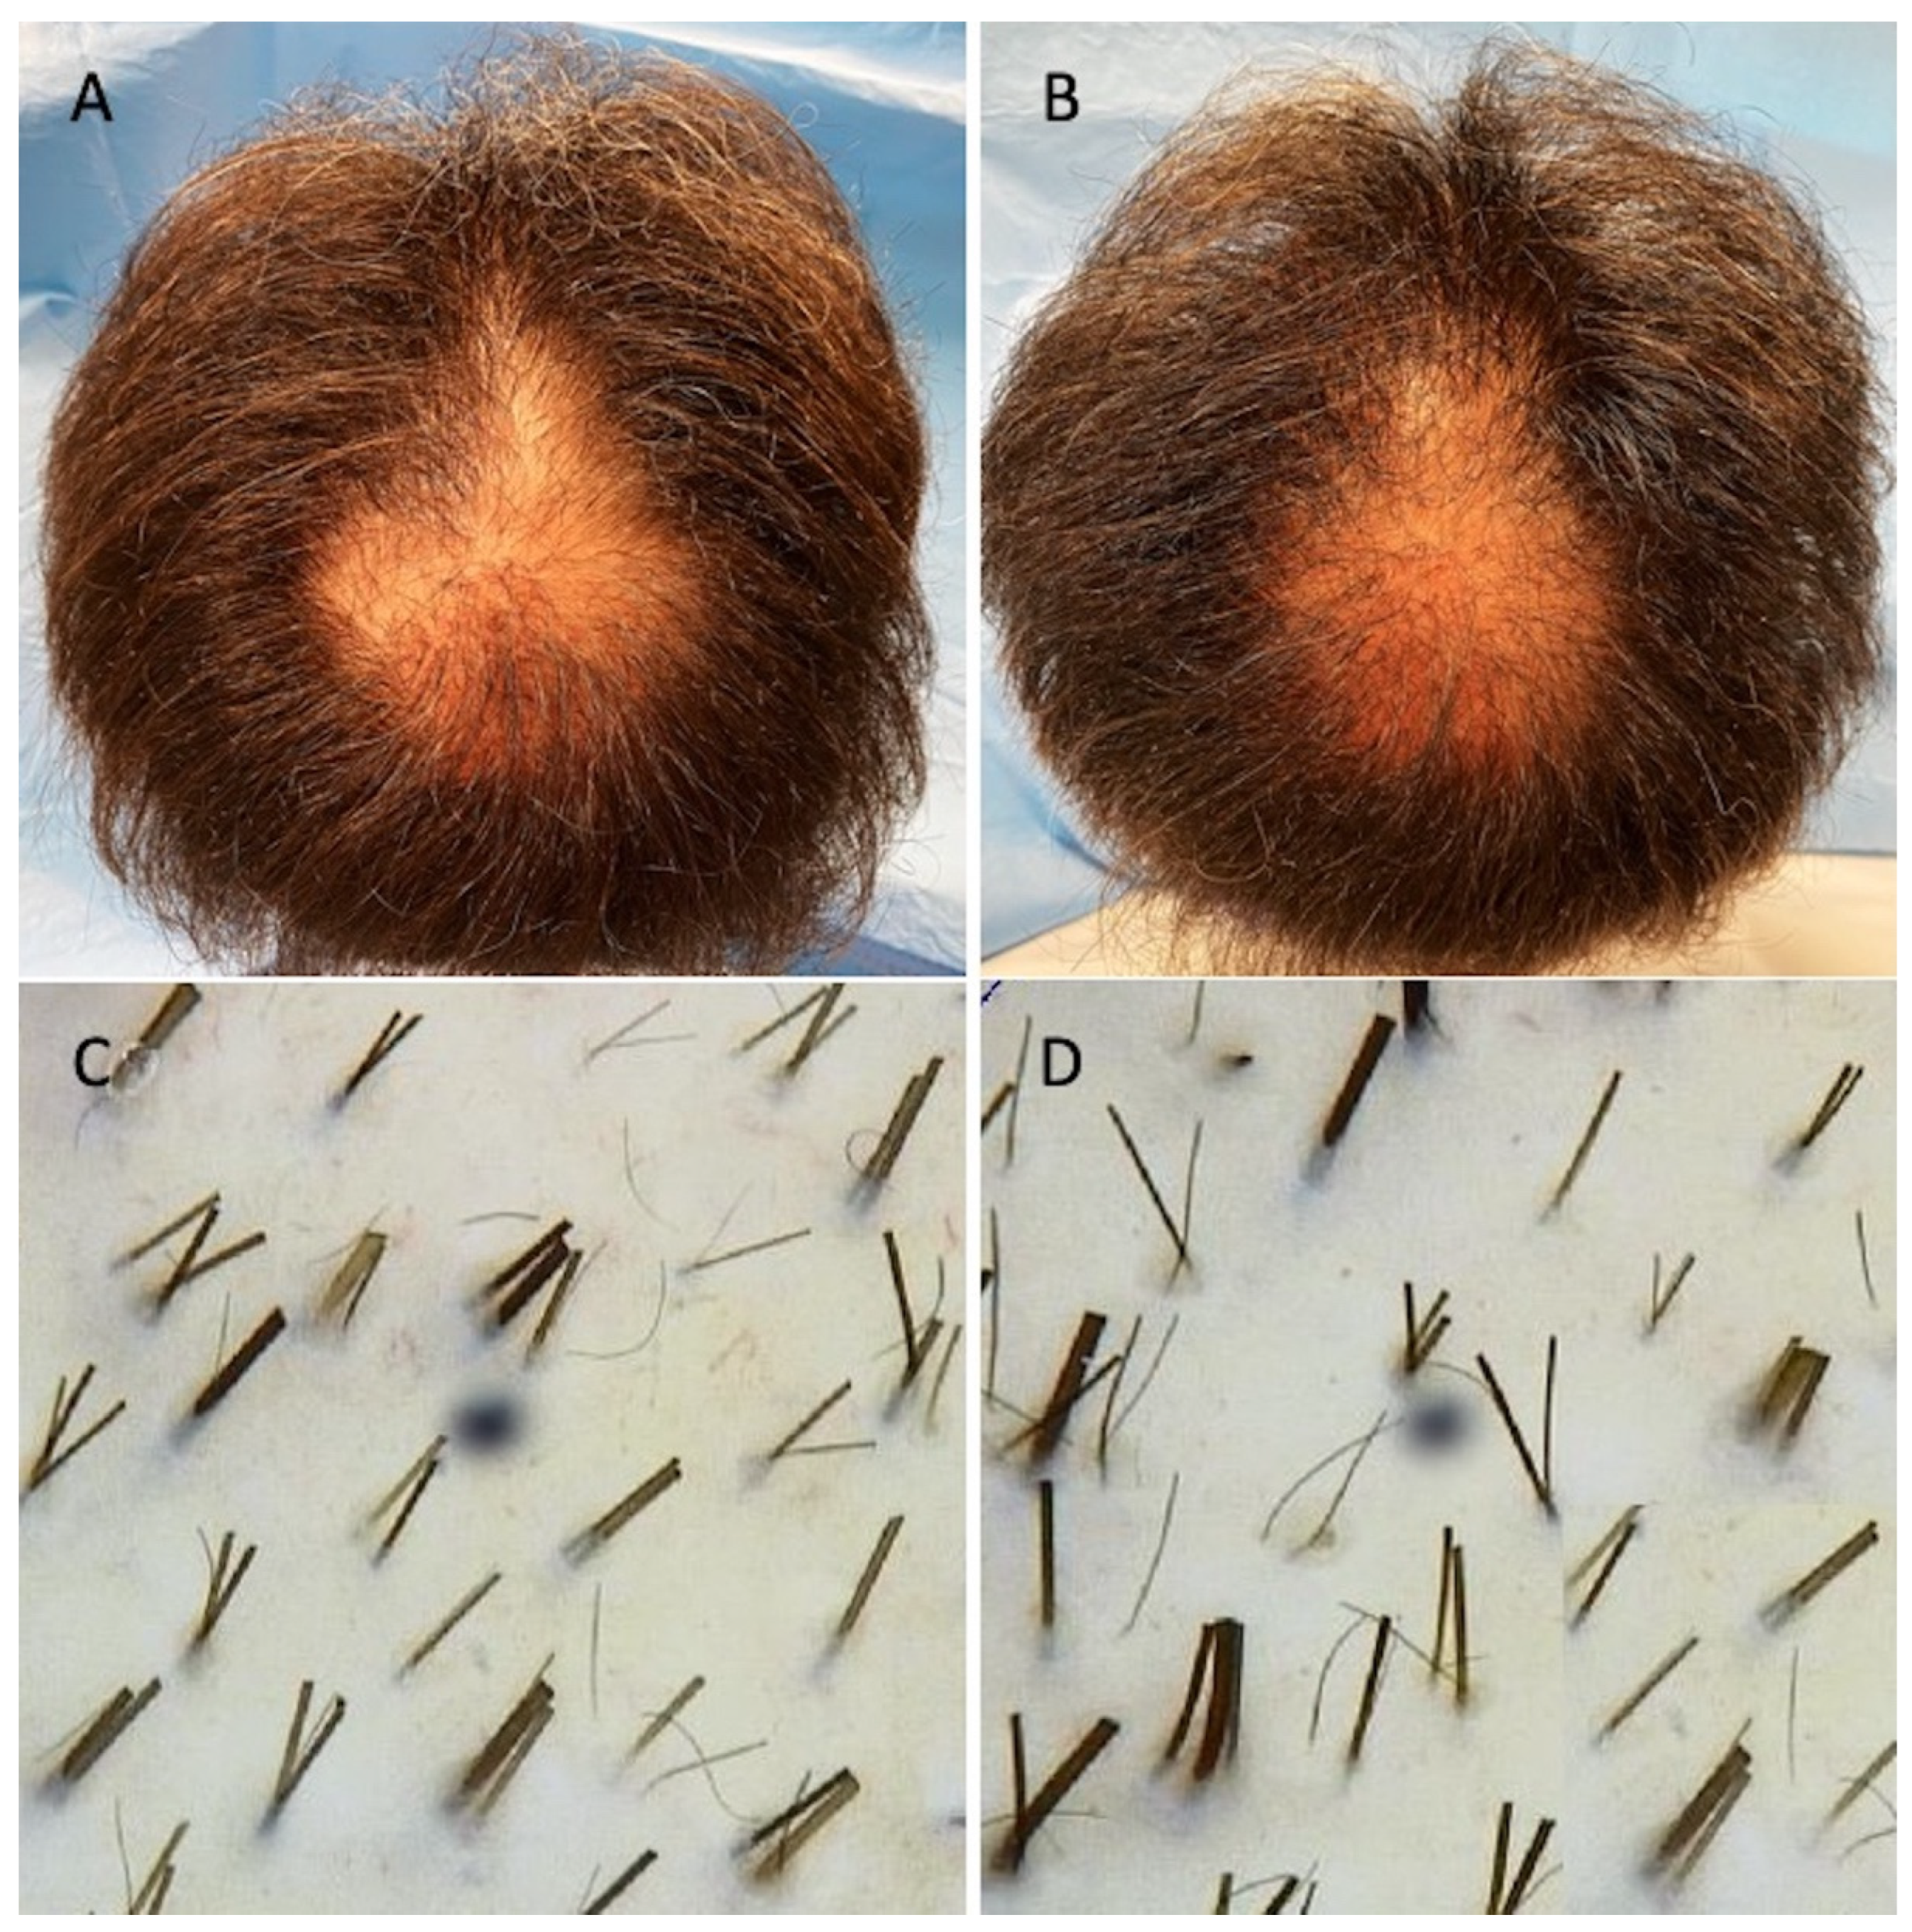 Applied Sciences | Free Full-Text | Hair Growth Booster Effects of  Micro-Needling with Low-Level Led Therapy and Growth Factors on Subjects  Treated with Finasteride®